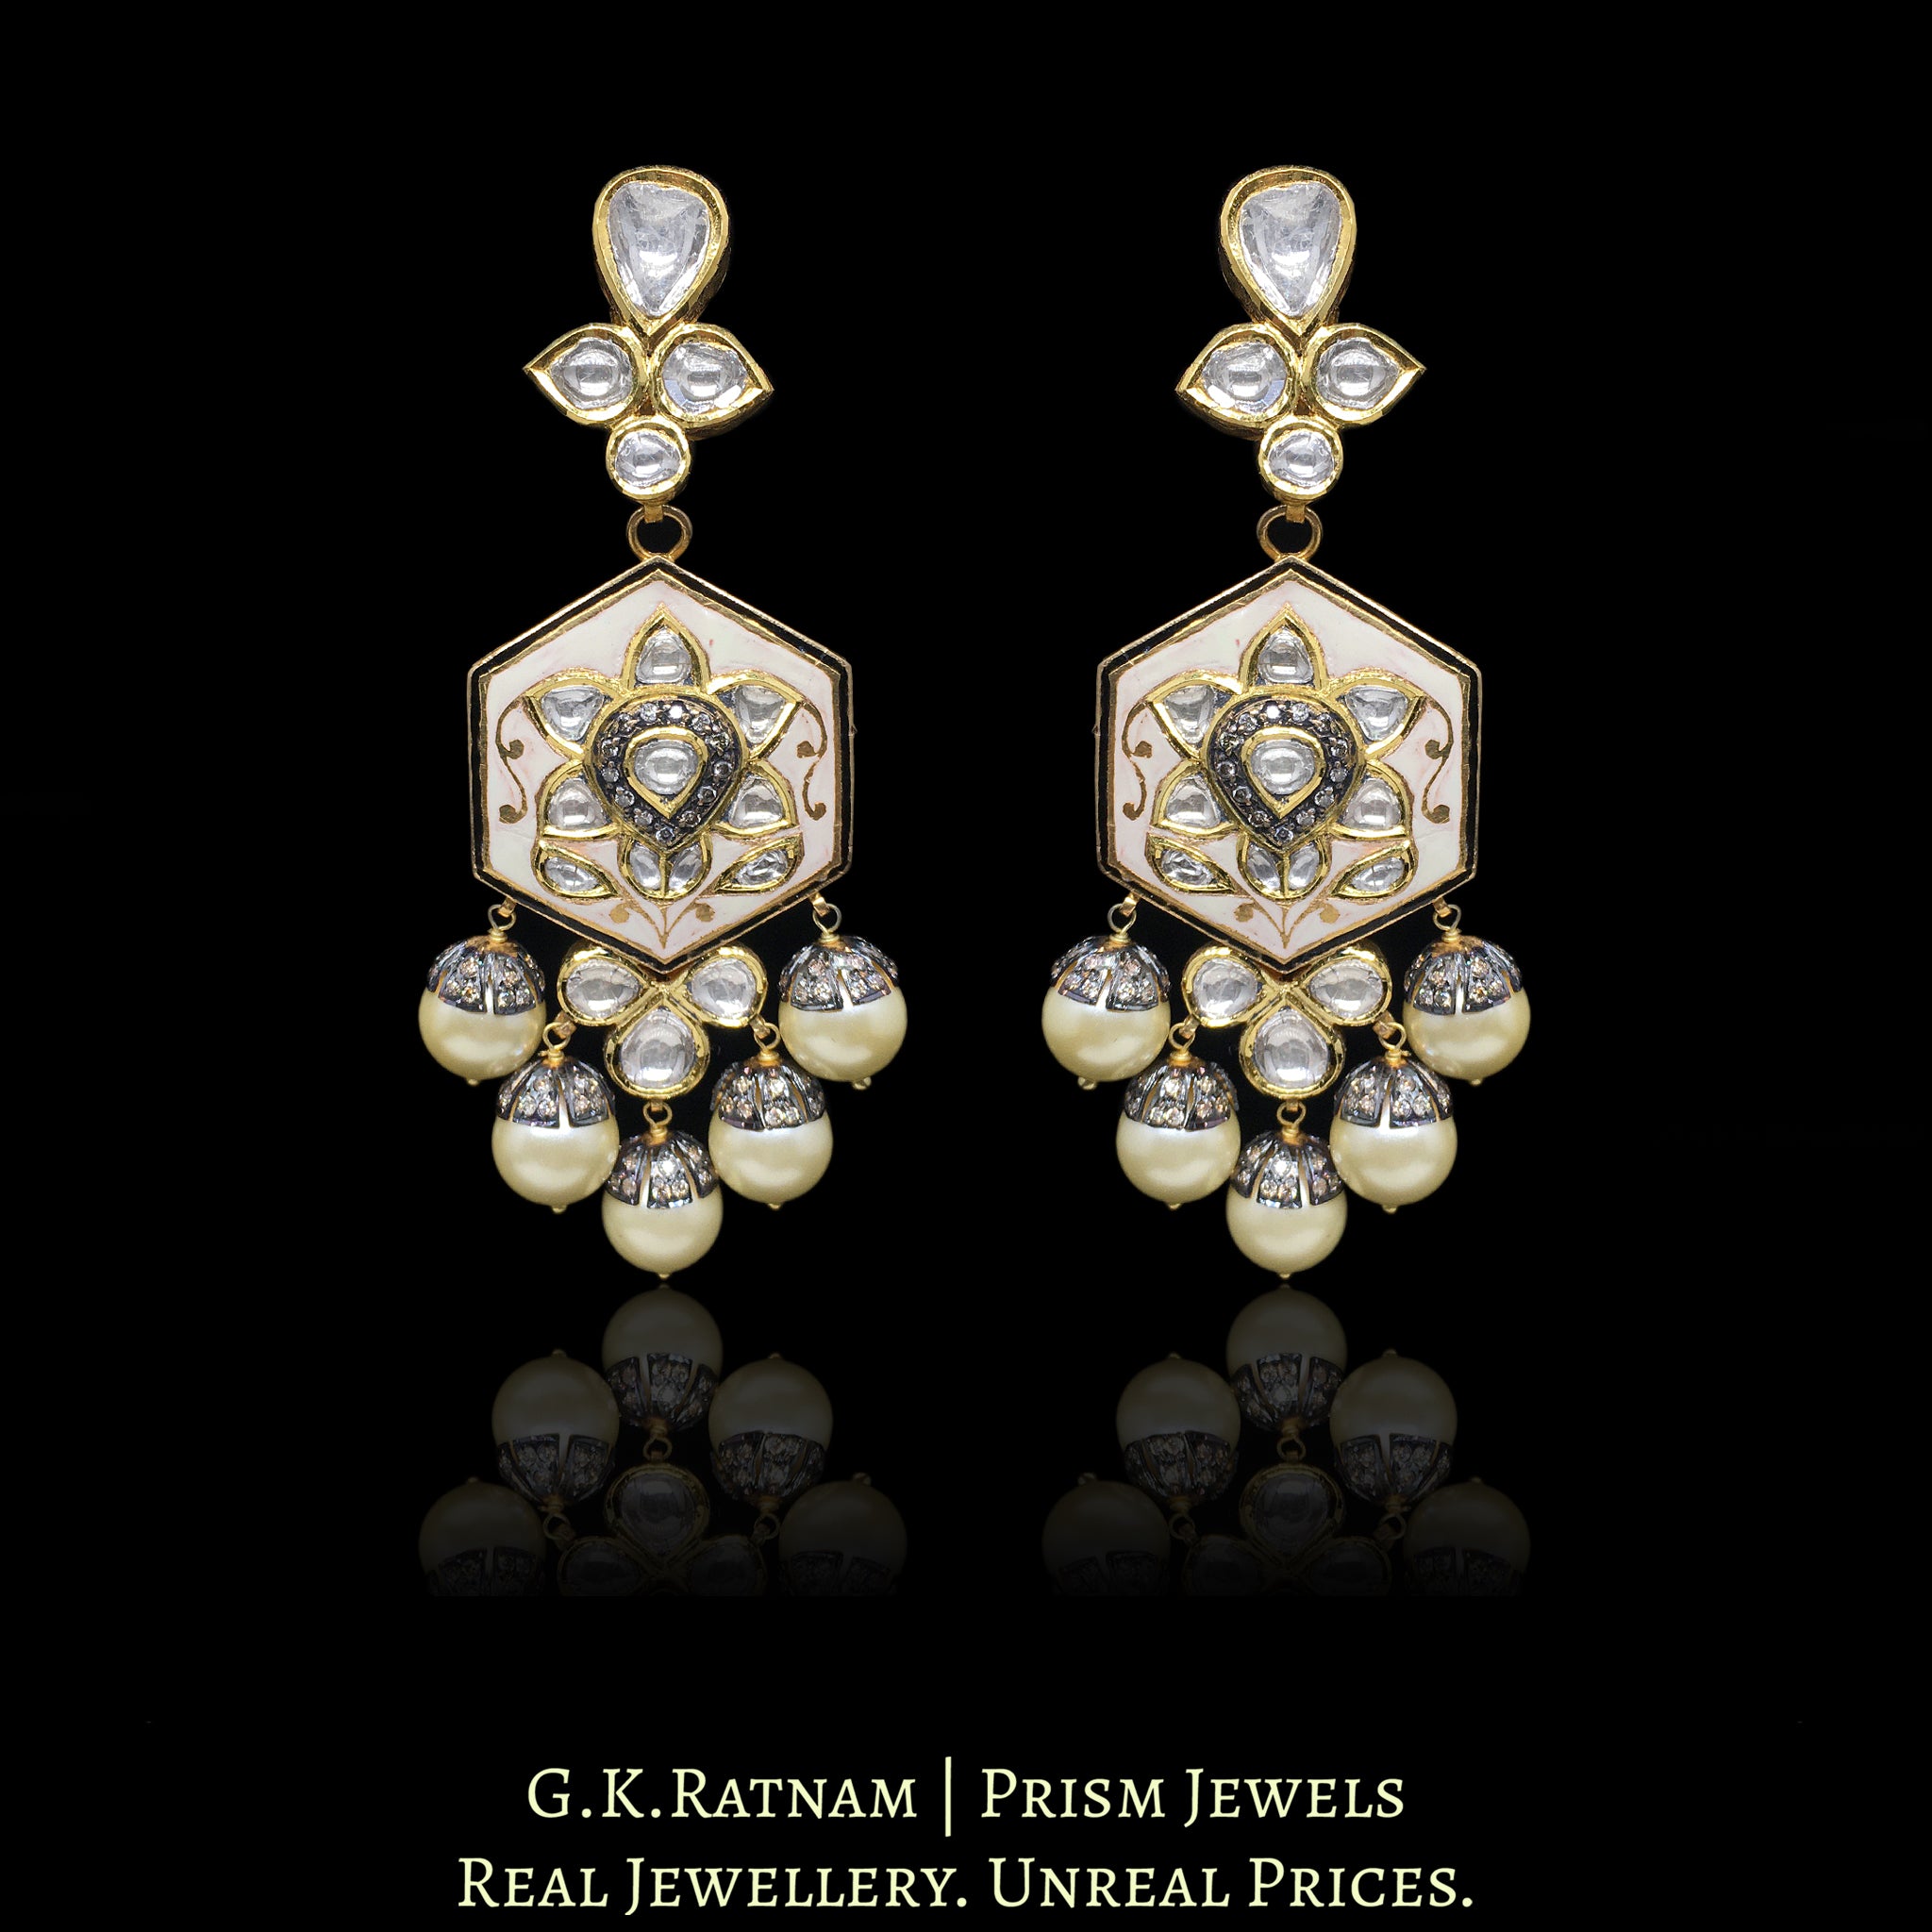 22k Gold and Diamond Polki reversible Long Earring Pair with Pearls